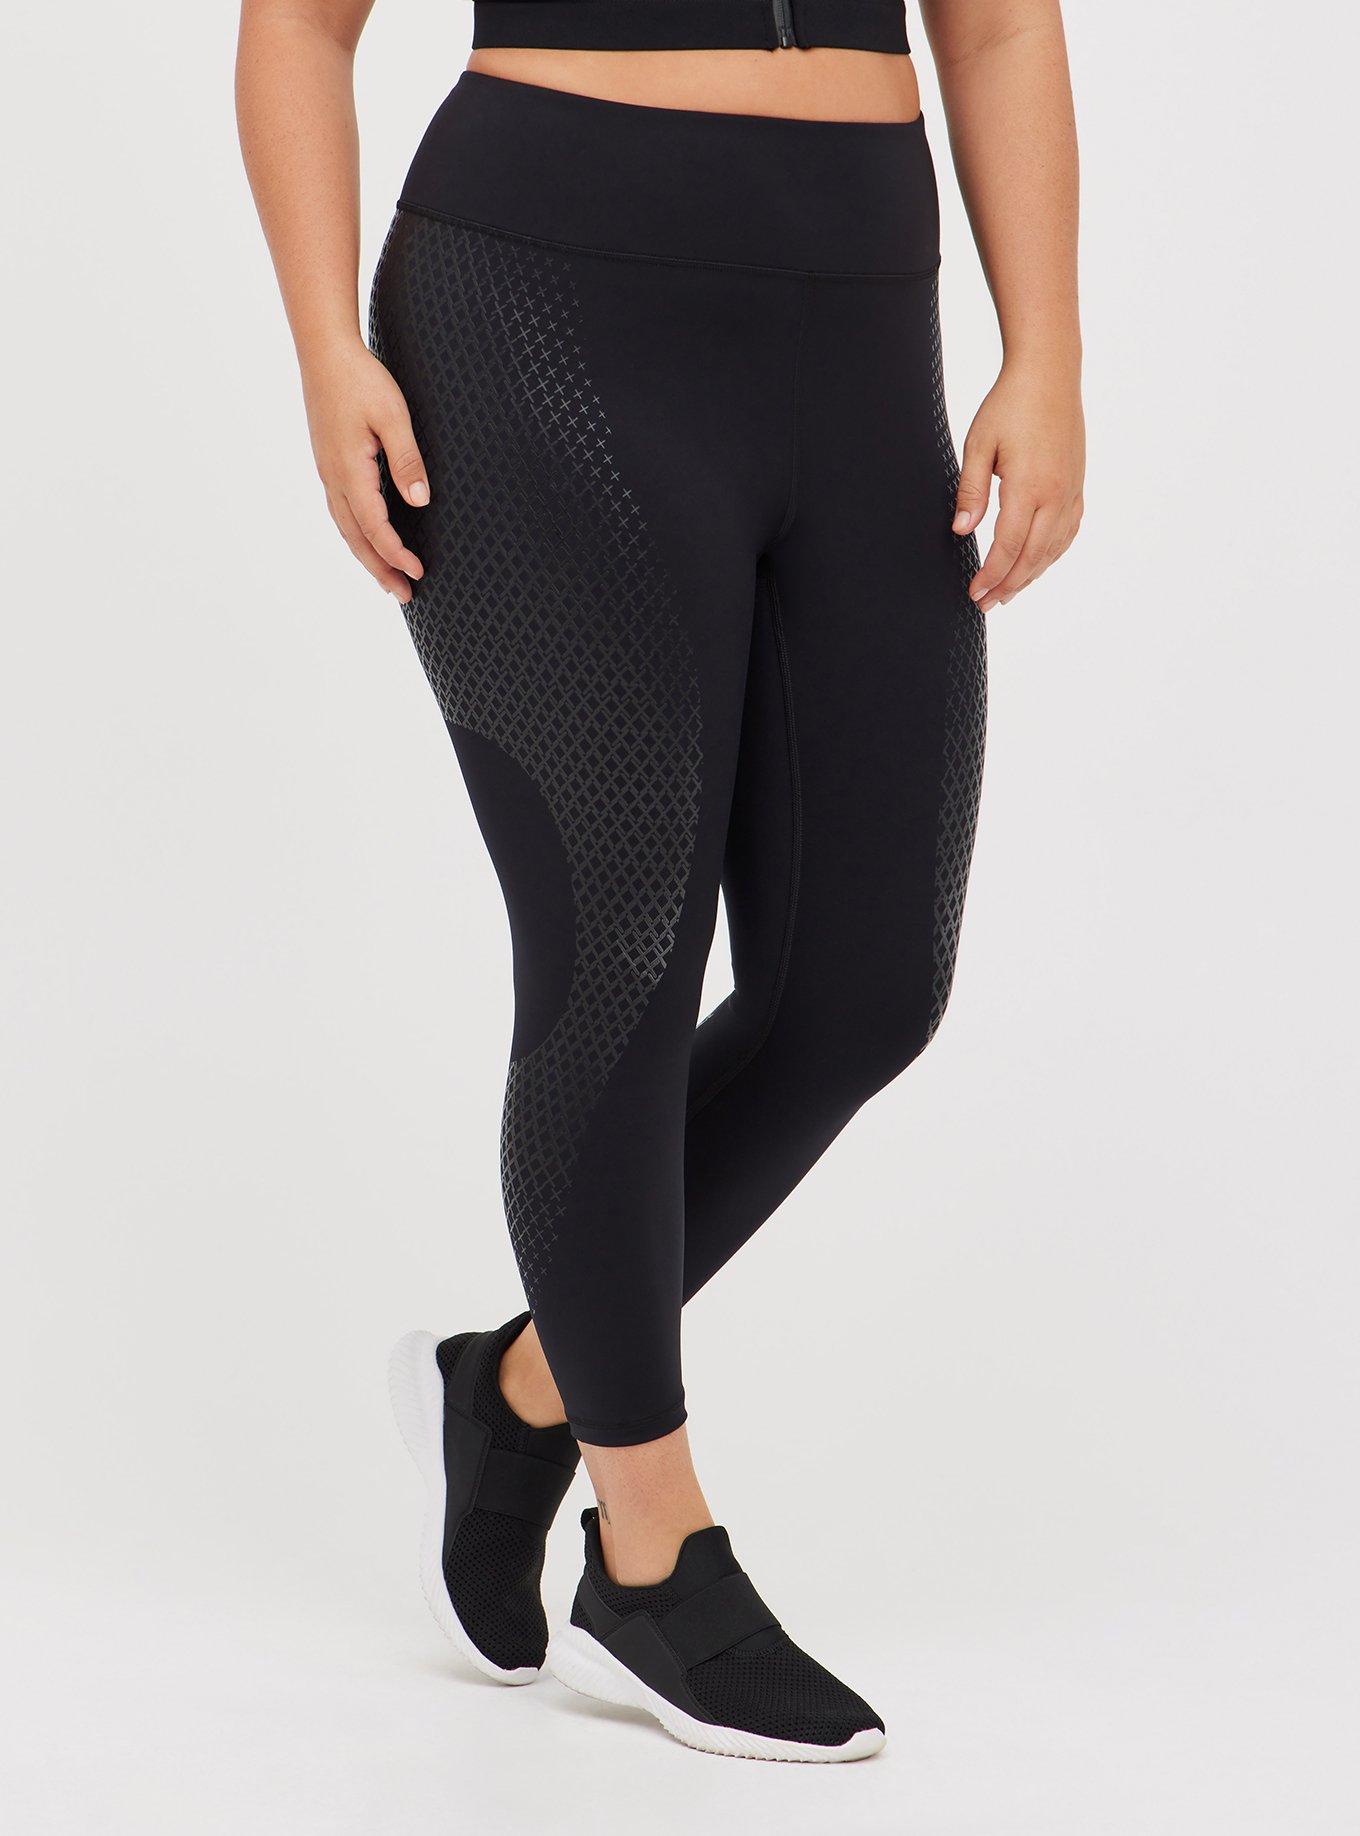 Under Armour, Pants & Jumpsuits, Under Armour Black Gray Printed High  Rise Leggings Mesh Panels Womens Small